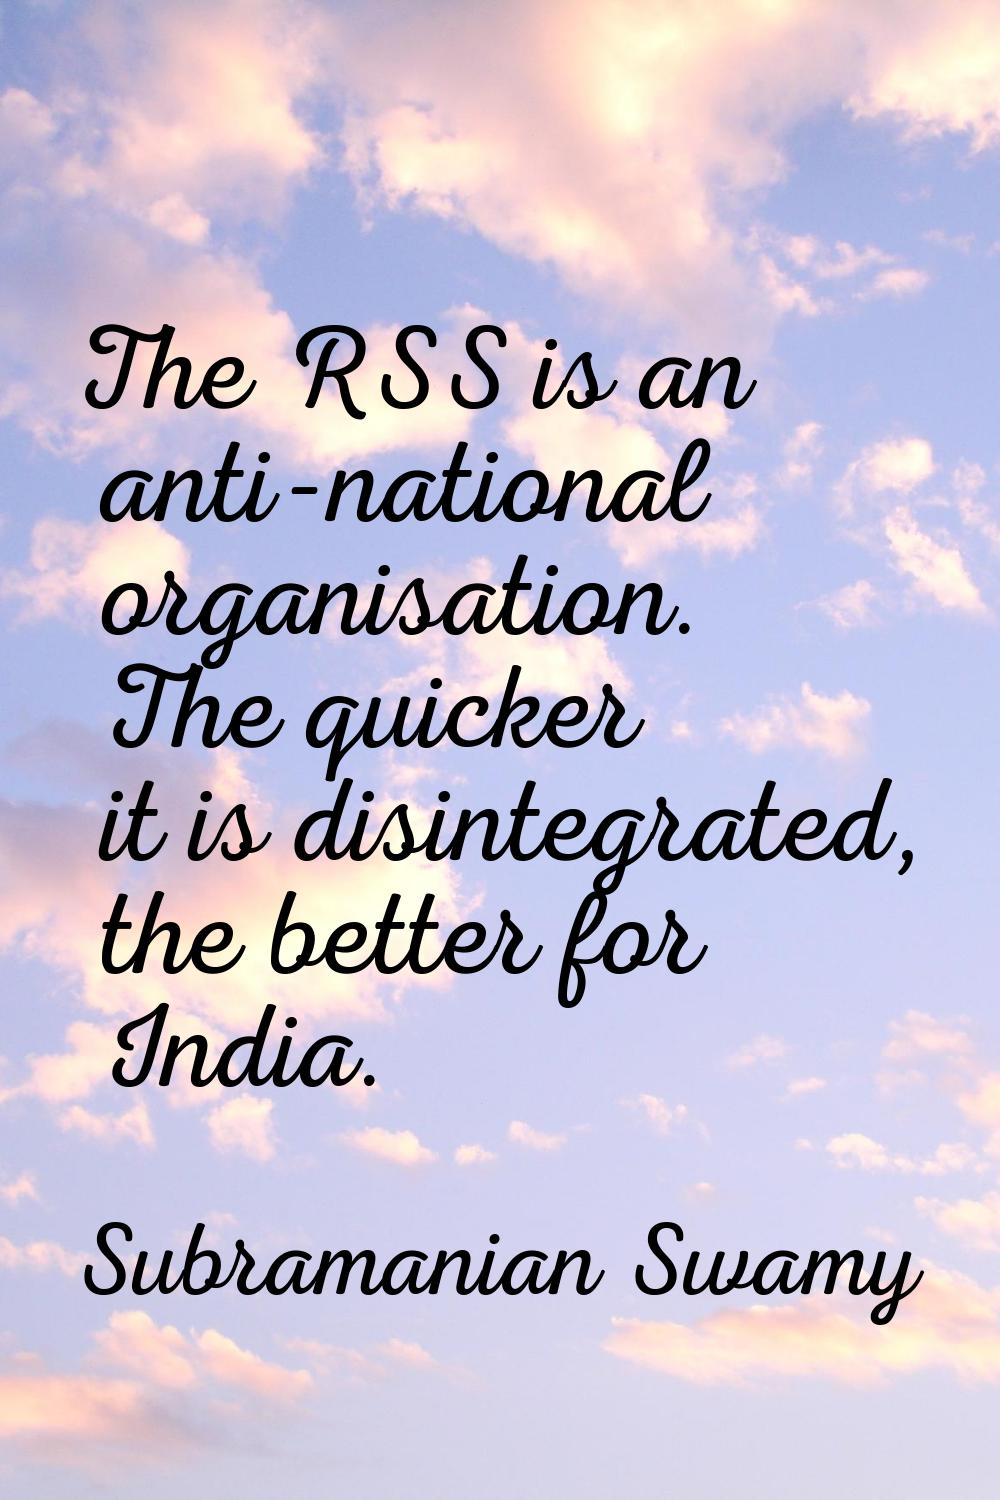 The RSS is an anti-national organisation. The quicker it is disintegrated, the better for India.